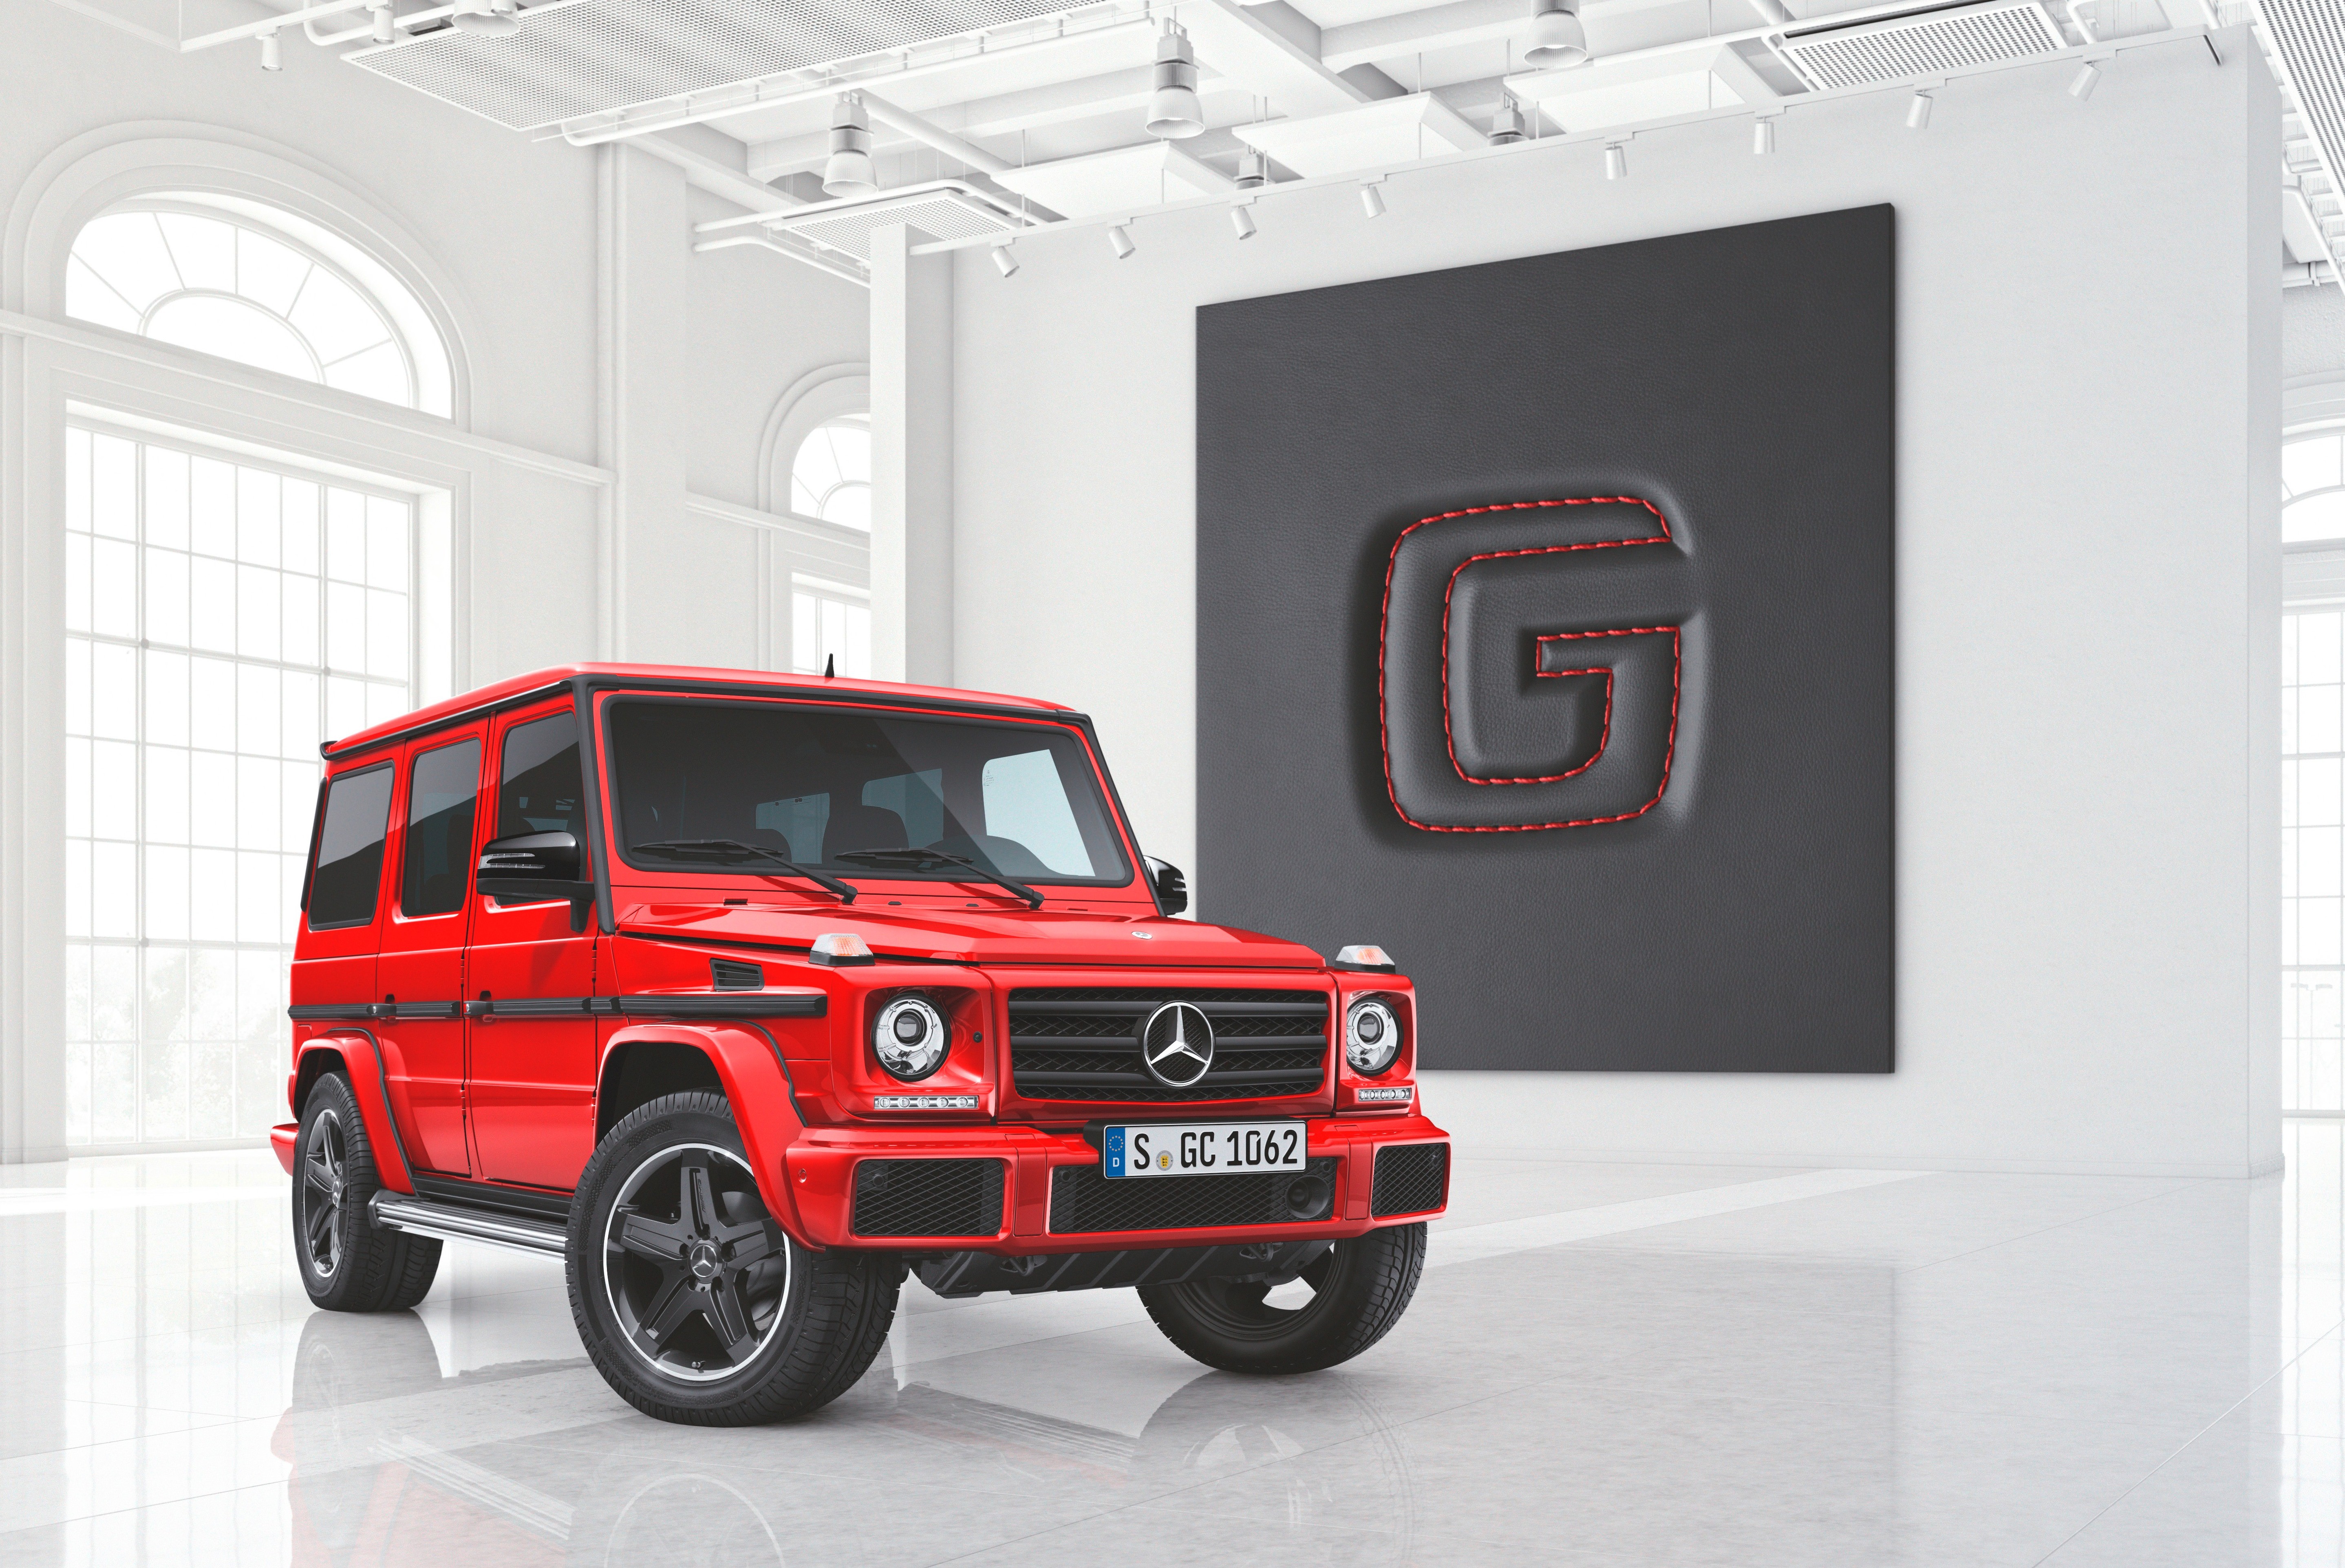 Mercedes-Benz’s red ‘designo manufaktur’ edition brightens the G-Class and puts ‘Thug Black’ paintwork in the past. Photo: Handout